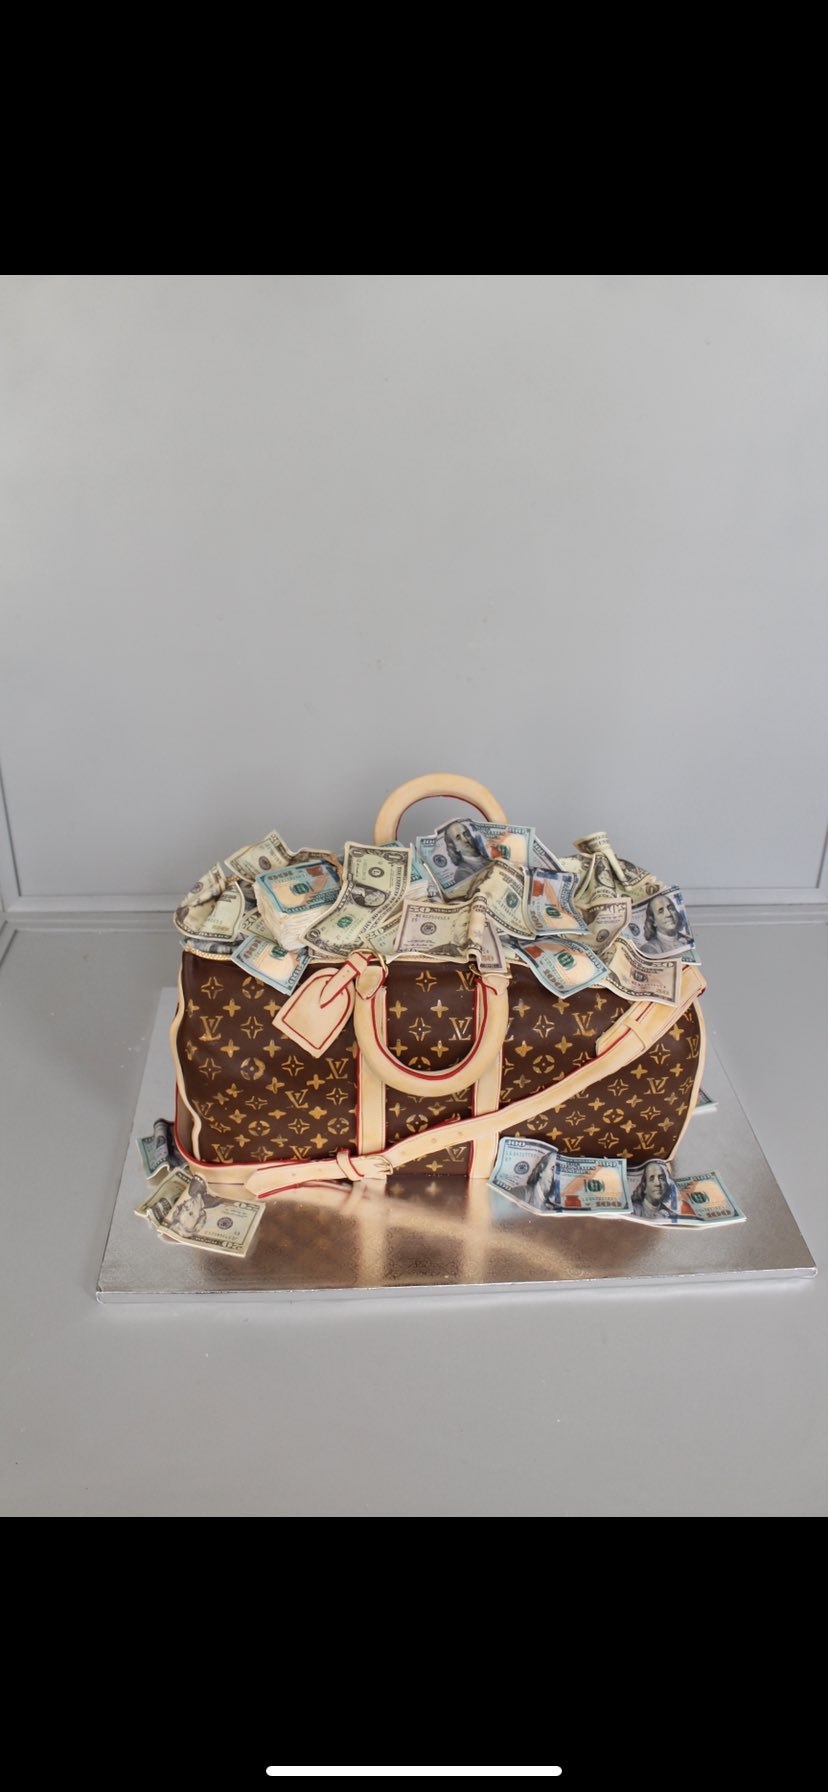 Louis Vuitton suitcase cake full with money